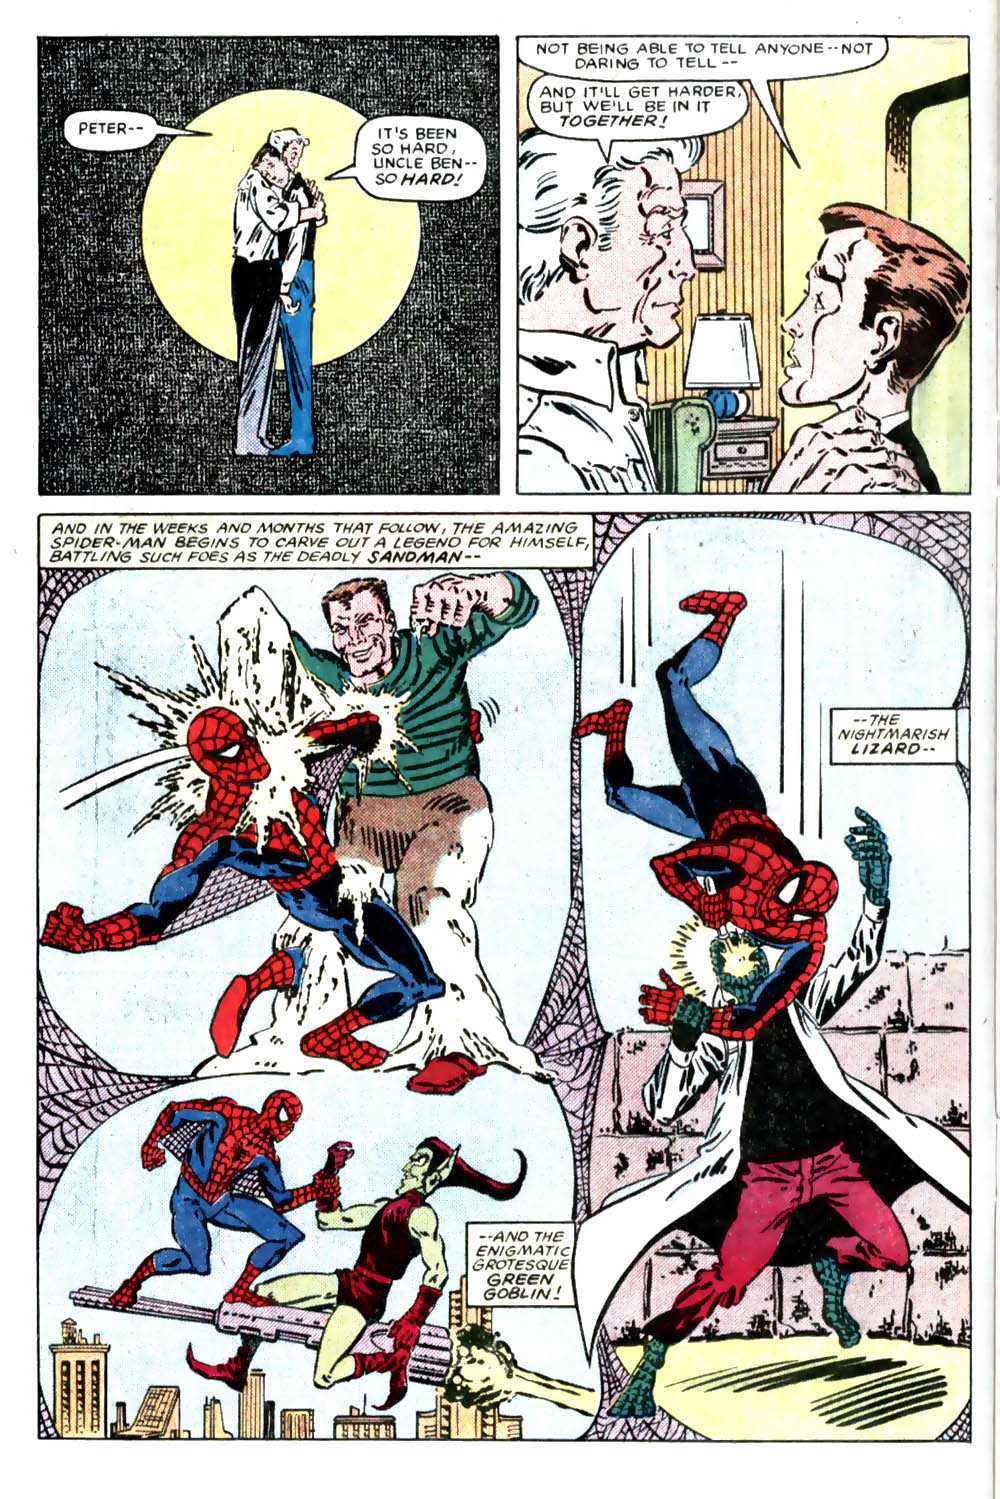 What If? (1977) issue 46 - Spiderman's uncle ben had lived - Page 13